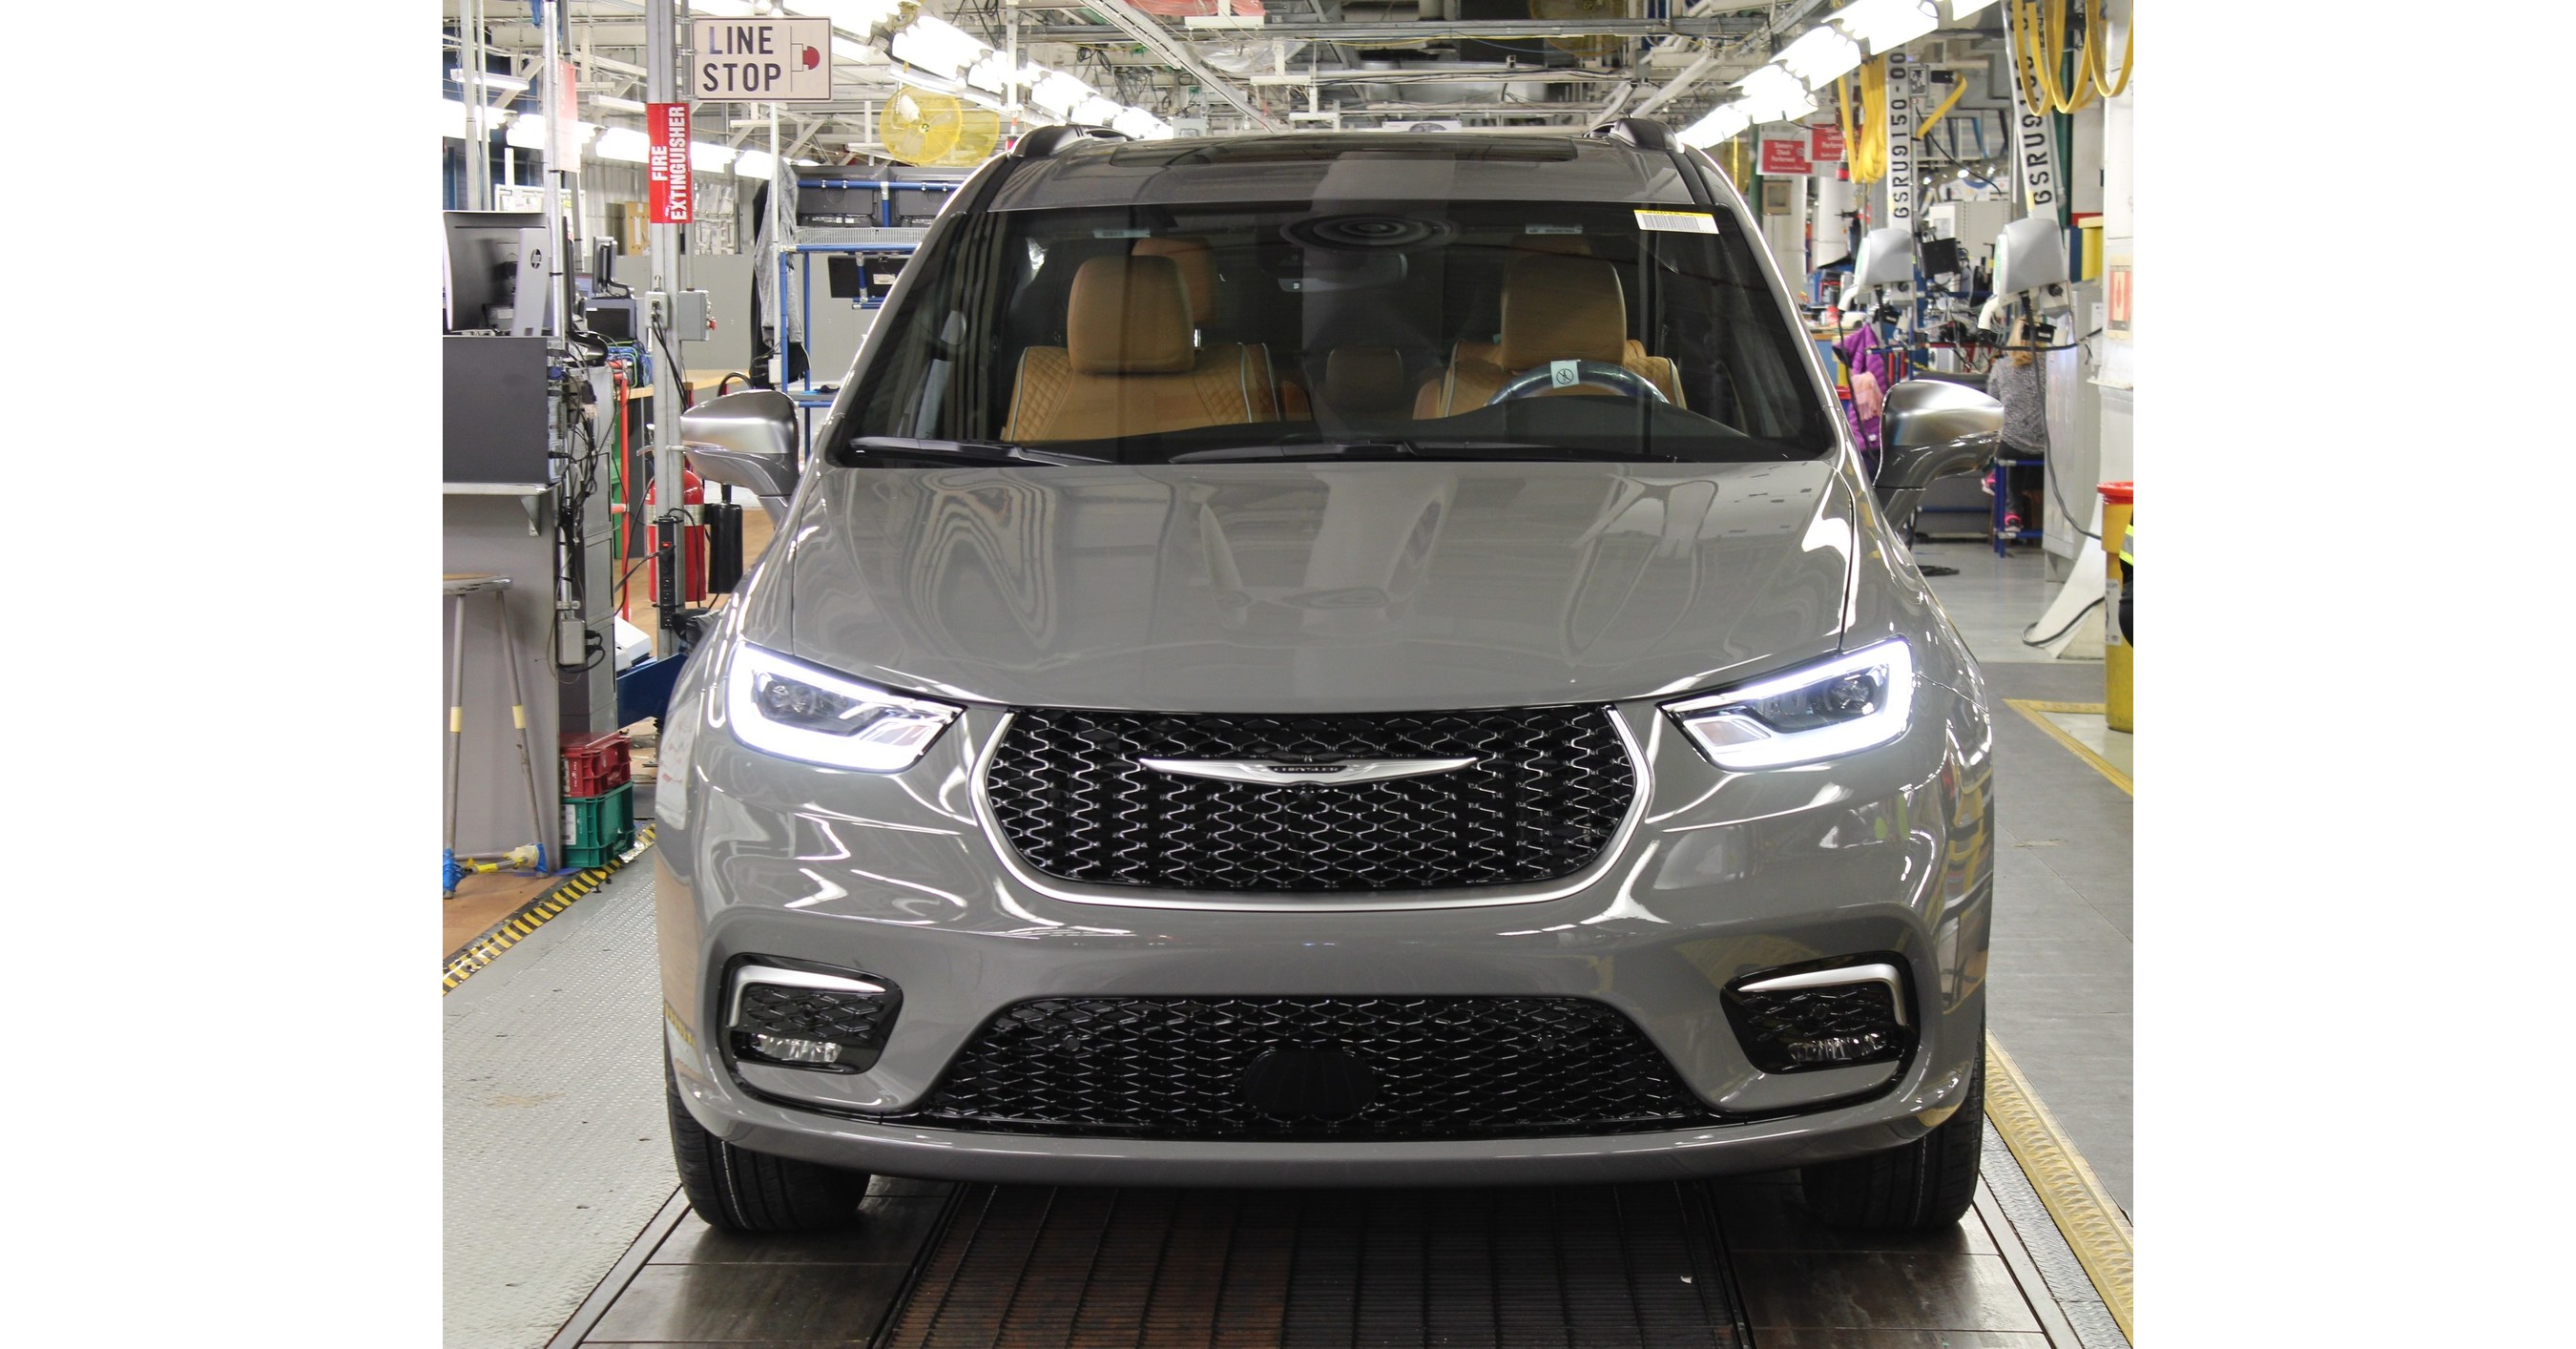 Looks like the 2021's are nearly here! | 2017+ Chrysler Pacifica